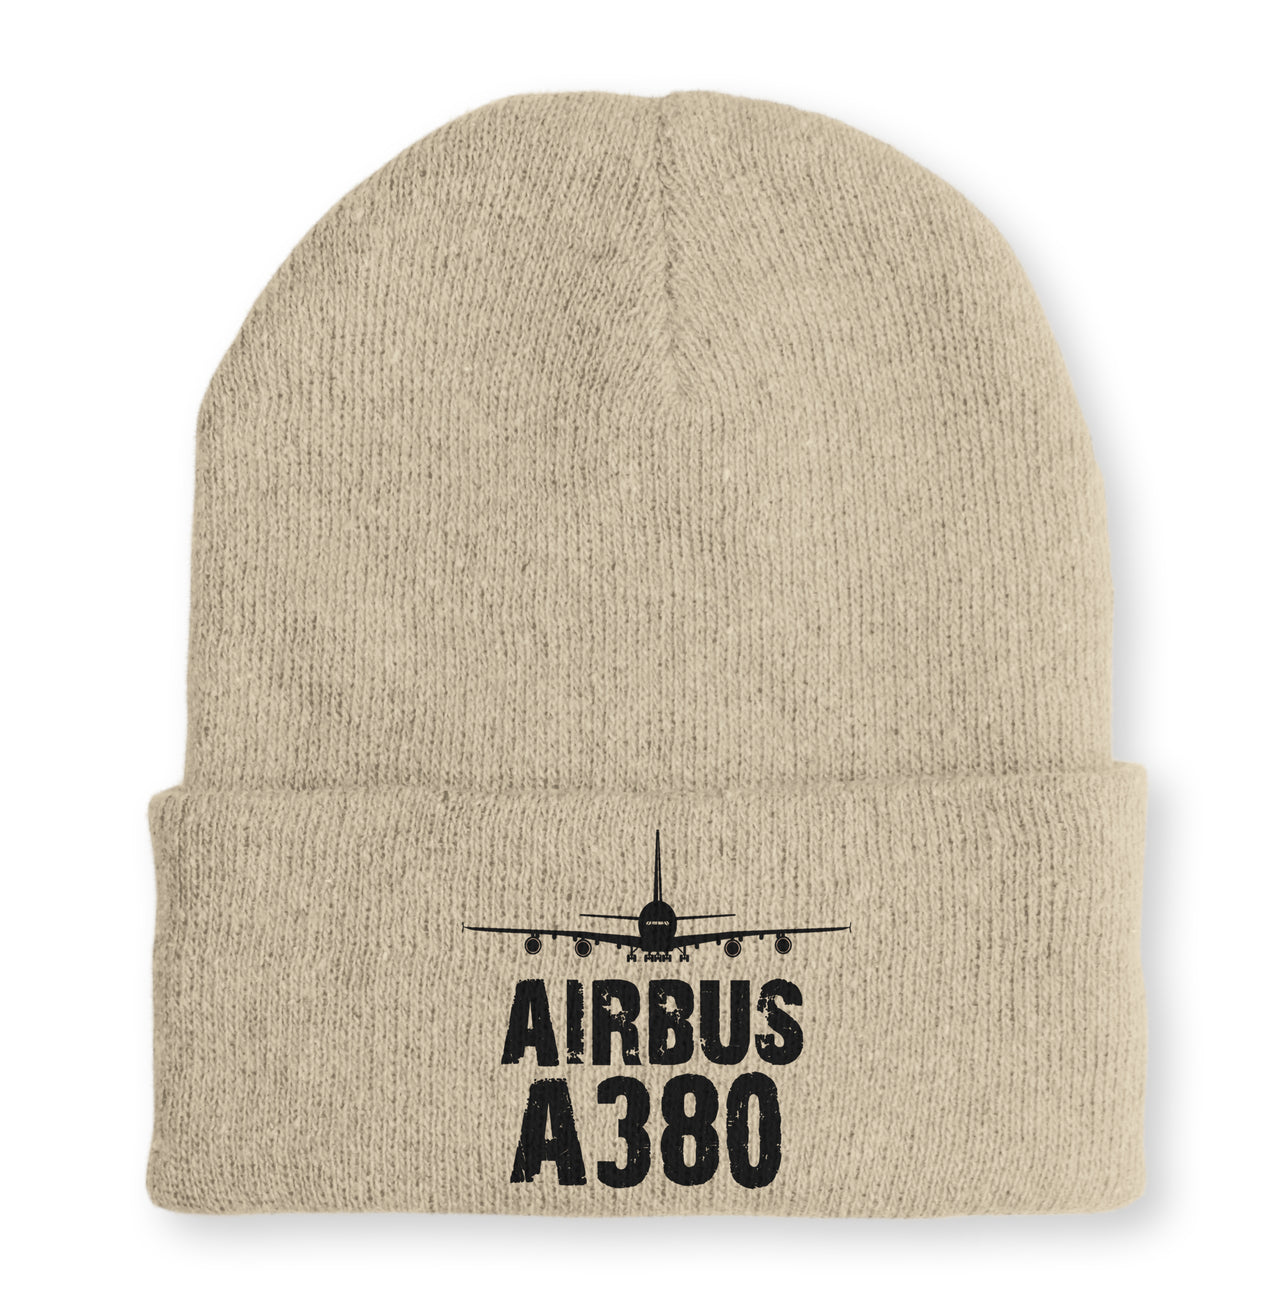 Airbus A380 & Plane Embroidered Beanies